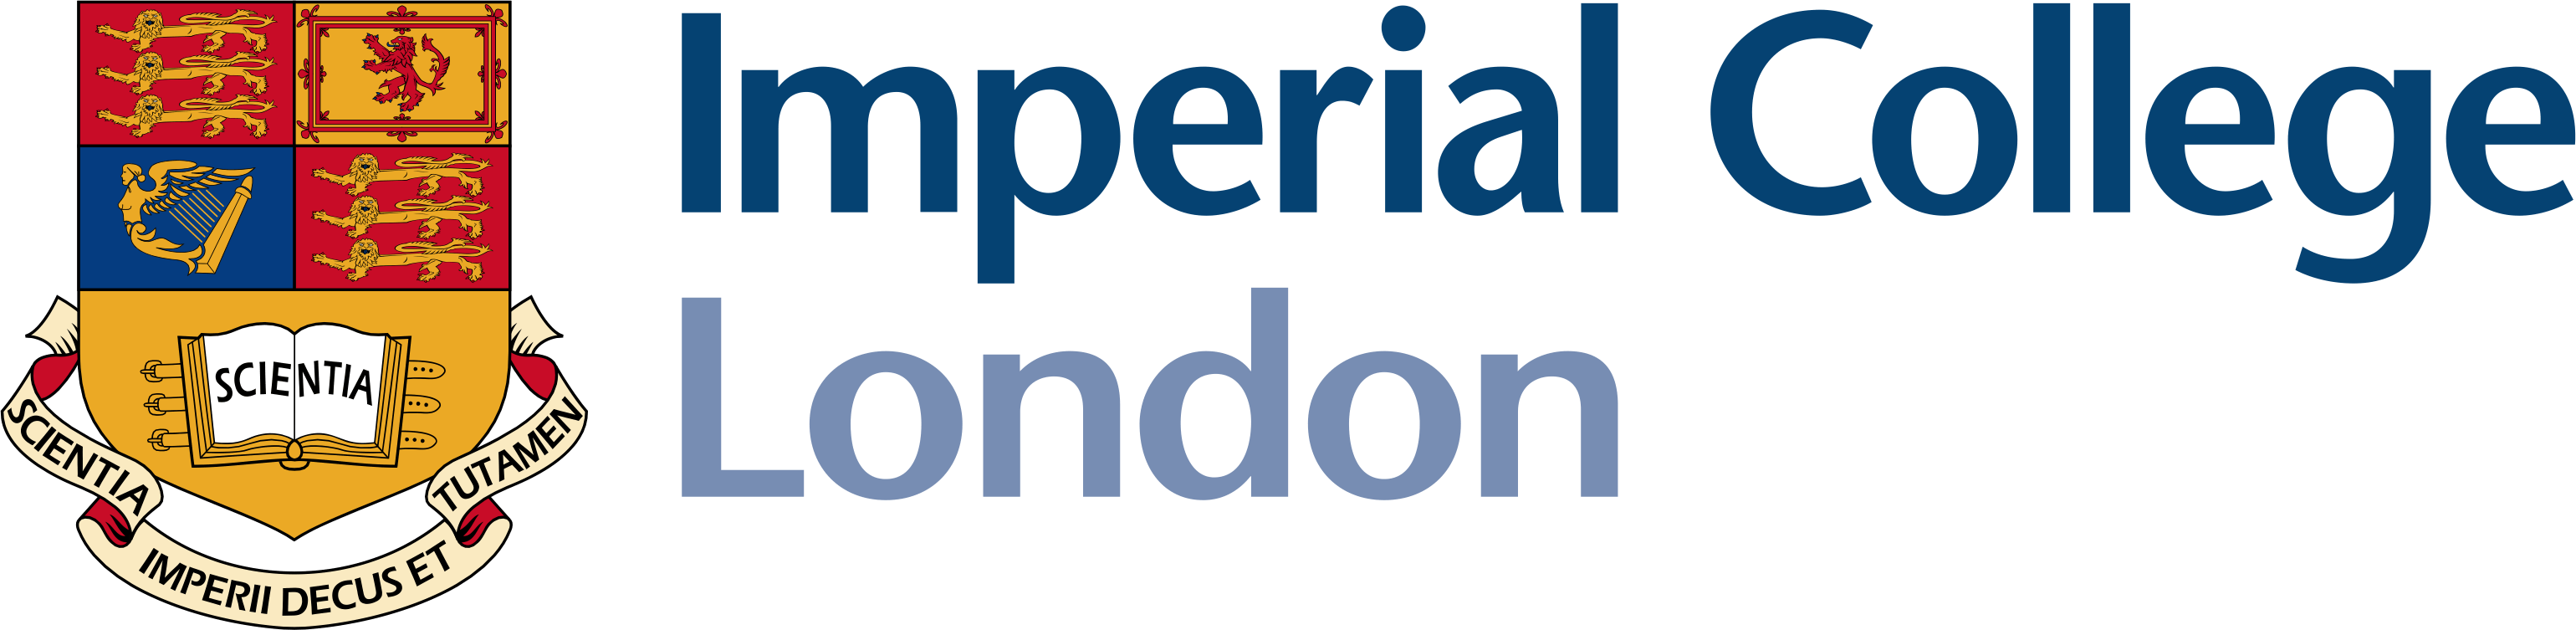 6 logo Imperial College London2 1